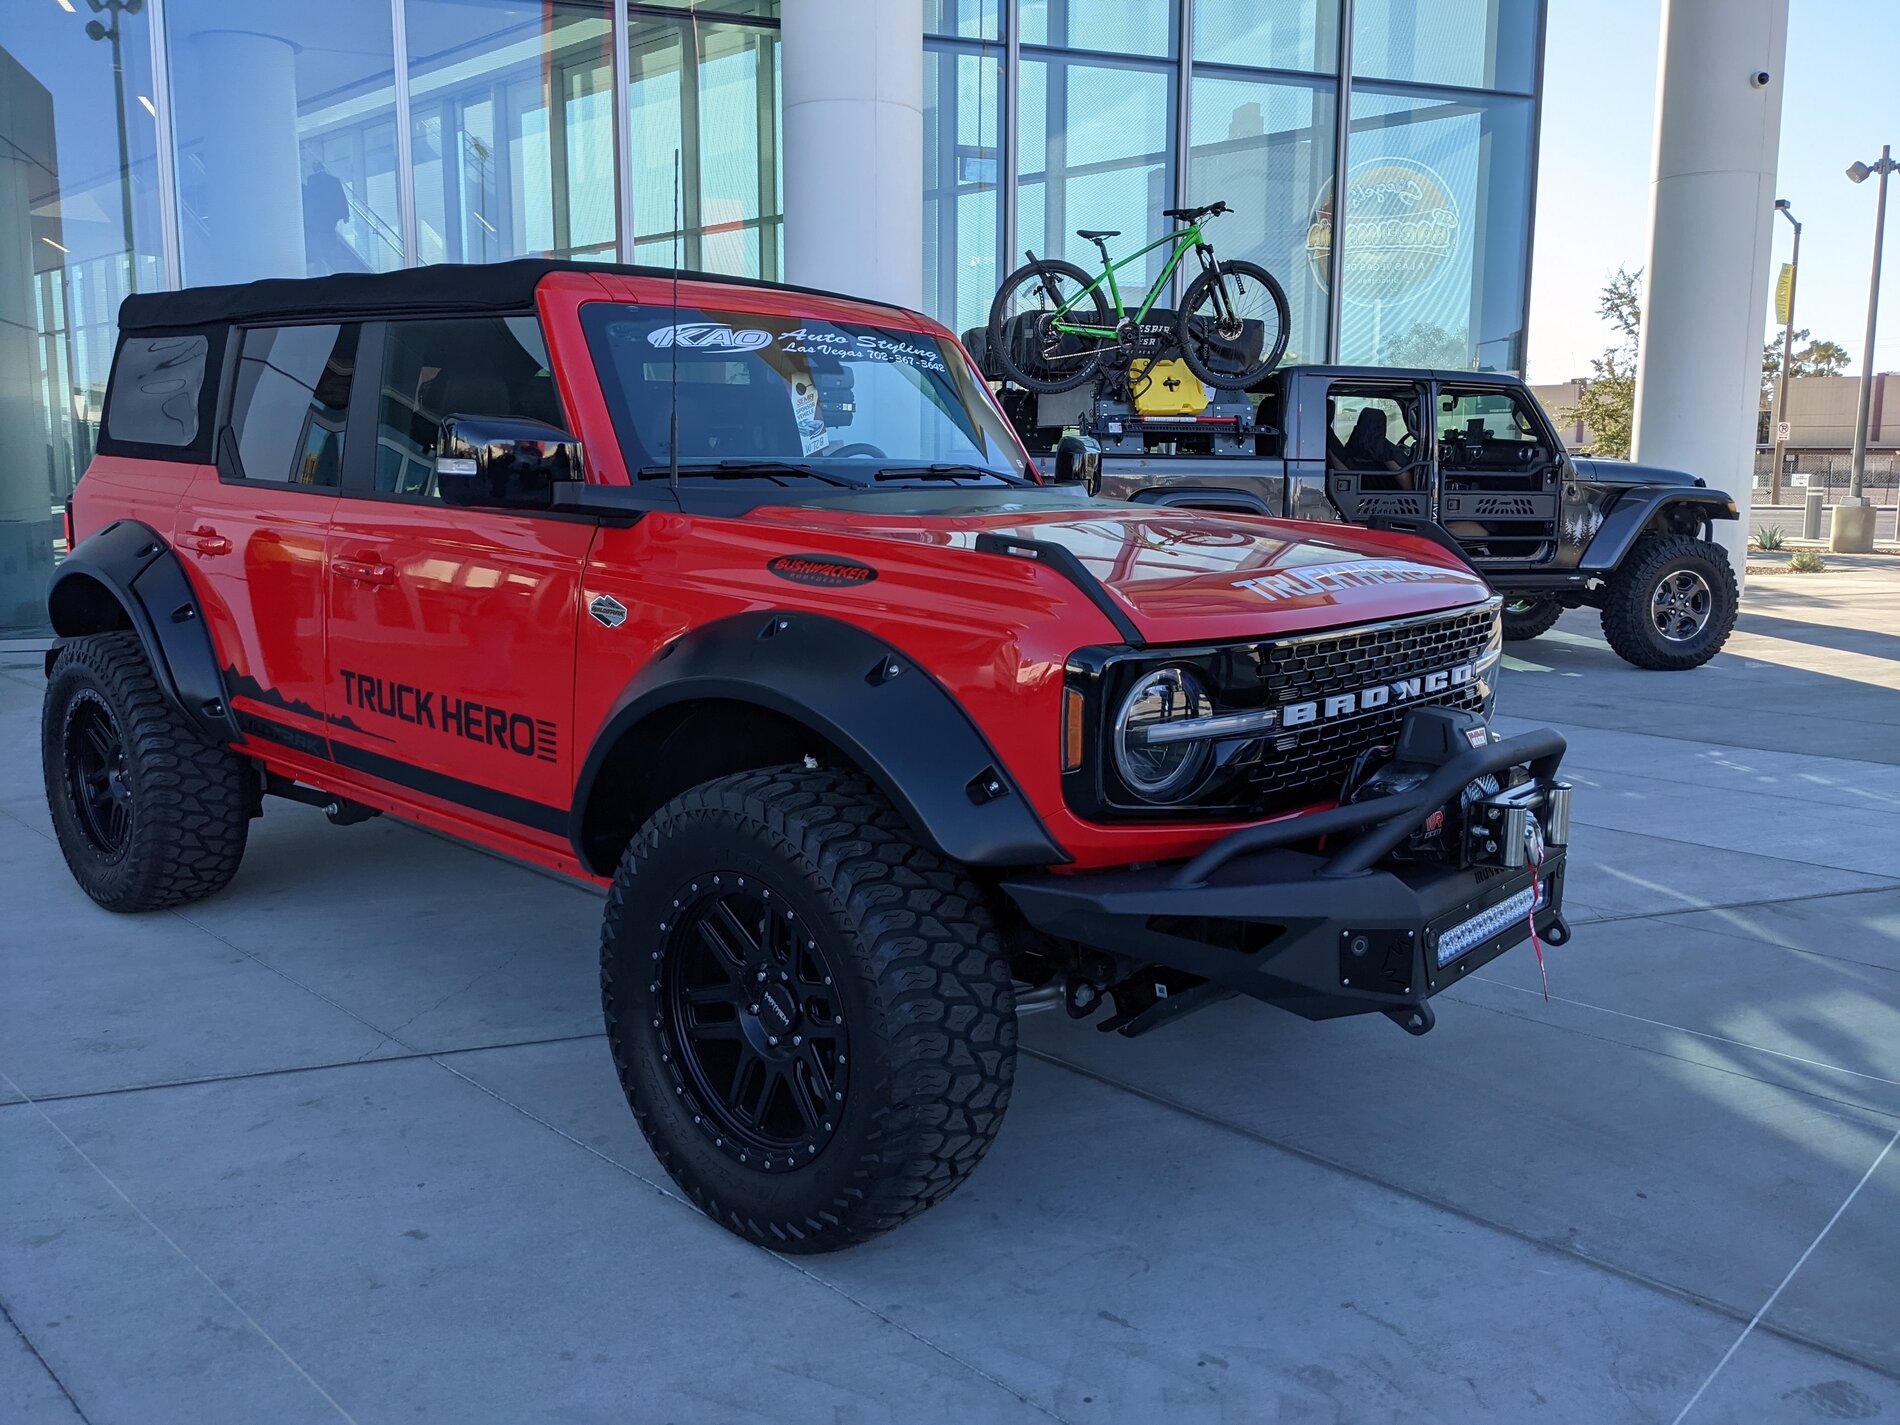 Ford Bronco Havoc Offroad / Truck Hero Bronco Builds at SEMA 2021 PXL_20211103_161708231